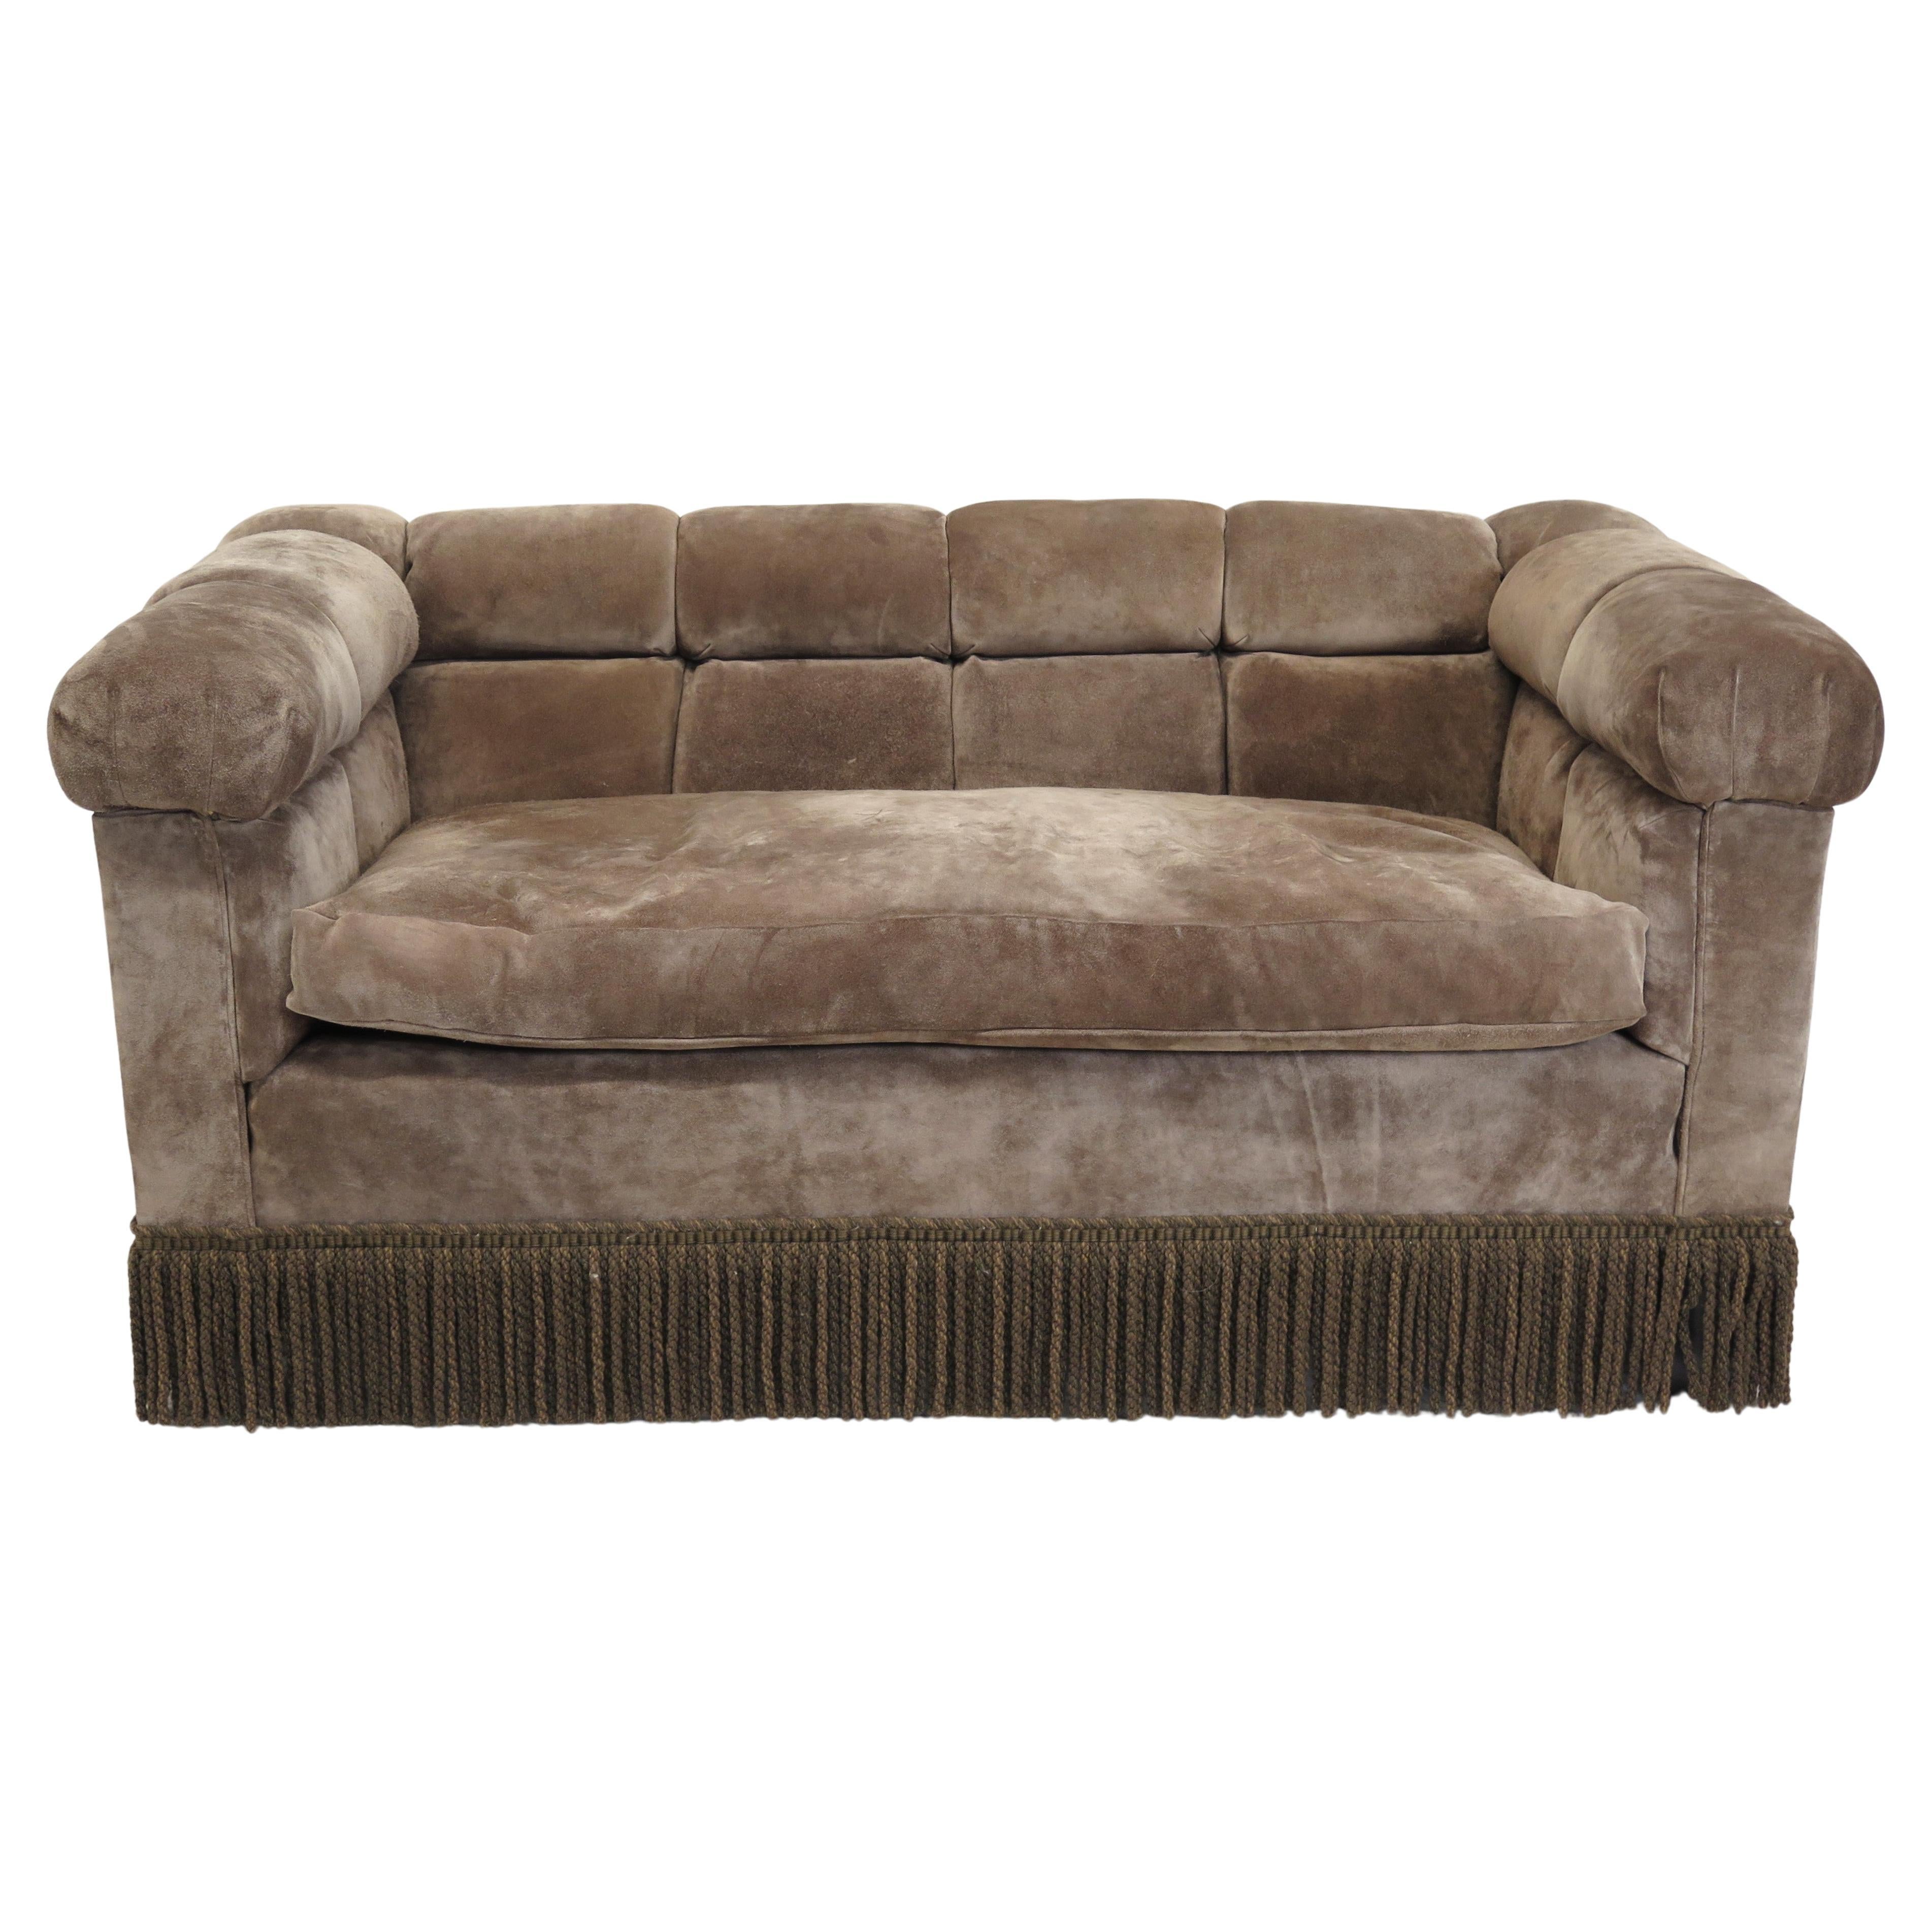 Mid-Century Suede Chesterfield Sofa by Dunbar For Sale